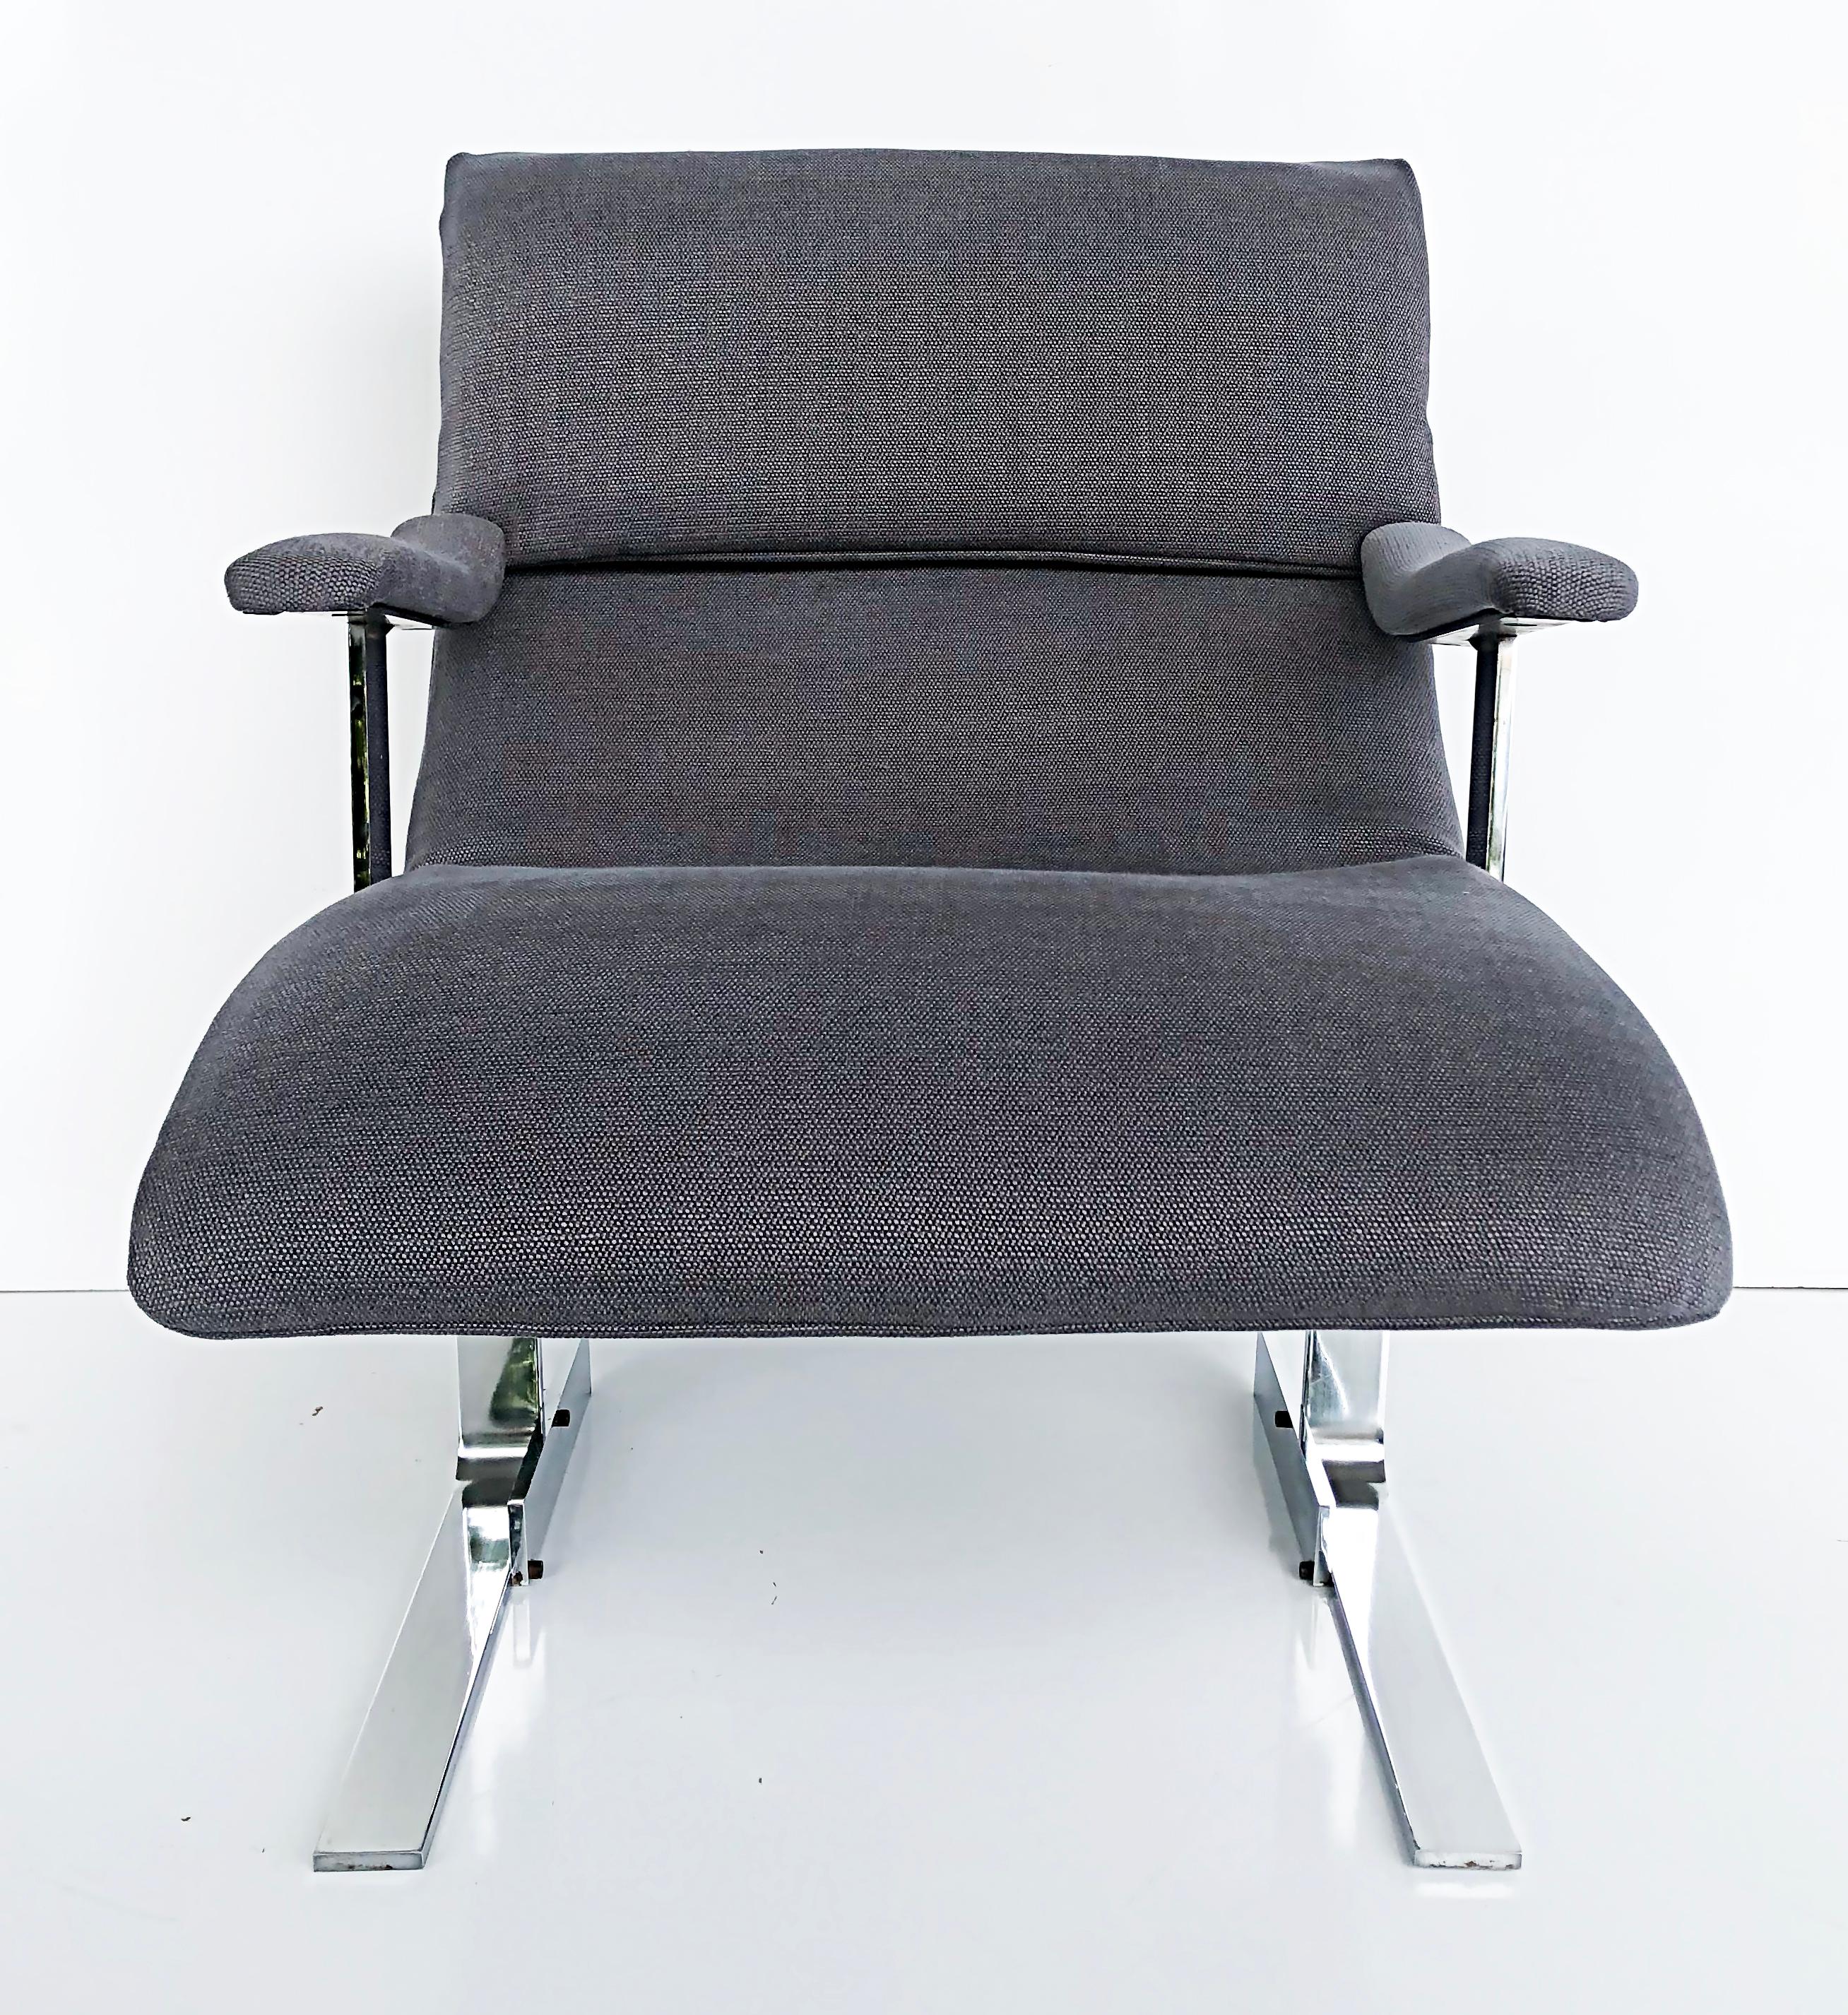 Saporiti Italia Attributed Club Chairs, New Kravet Upholstery

Offered for sale is a pair of club chairs that have been newly upholstered with Kravet fabric. These substantial stainless steel club chairs are attributed to Saporiti Italia.  Arm